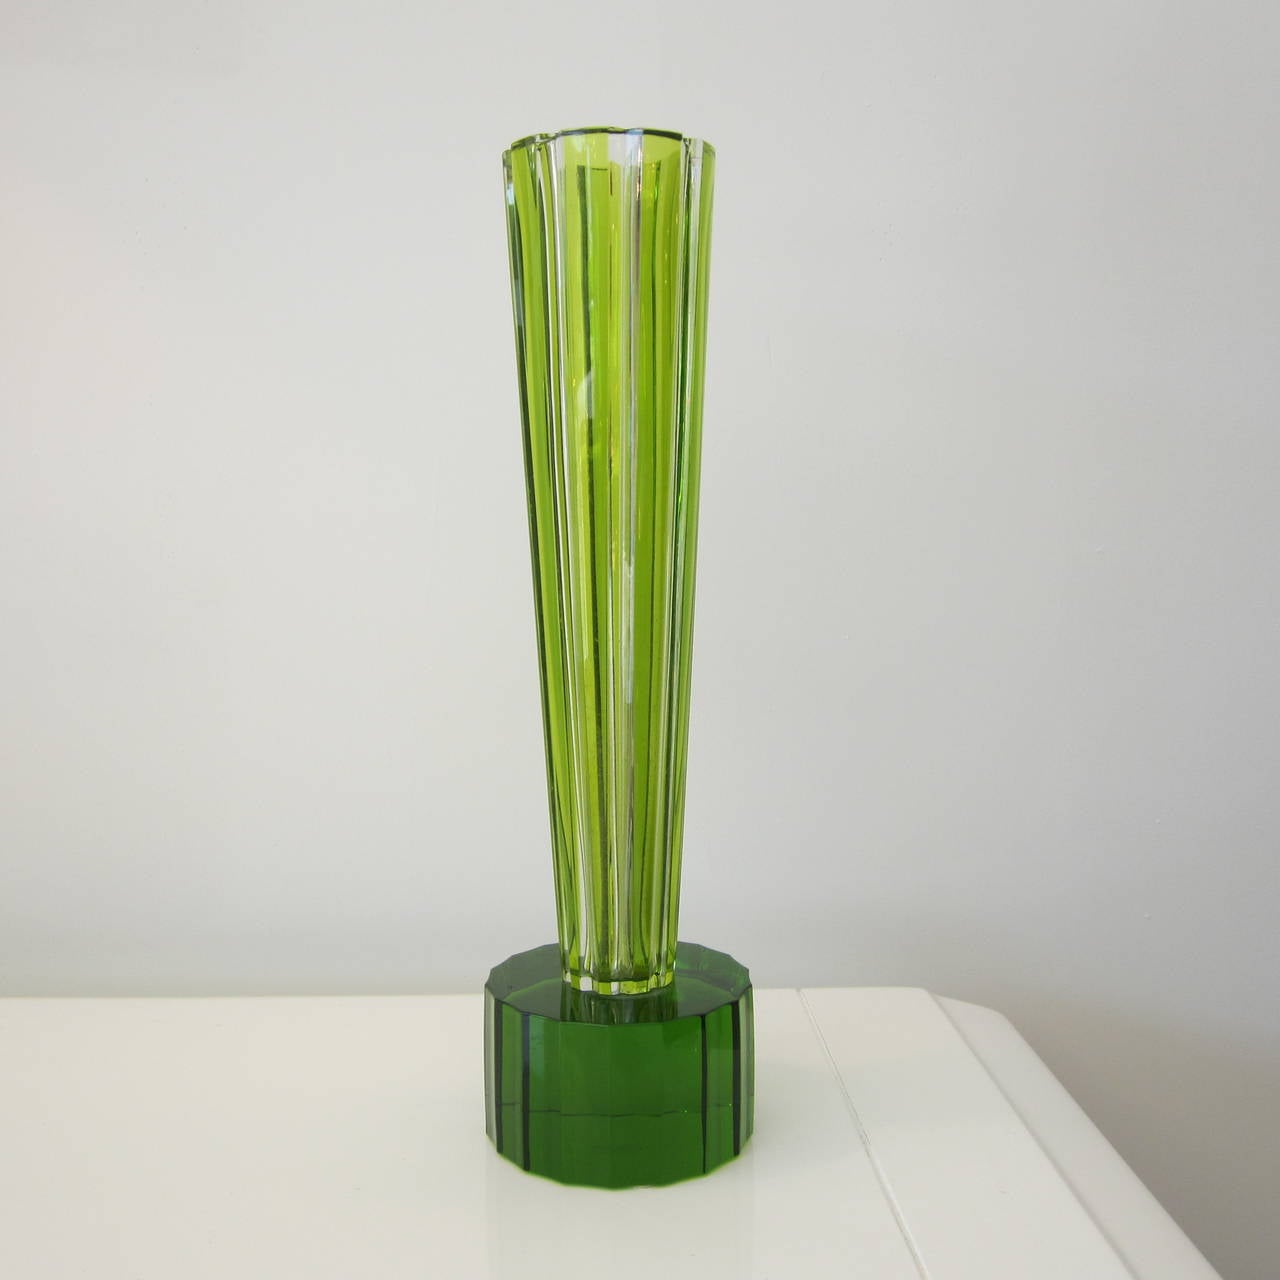 From the Rencontre Collection, this is the stunning Enki Olivine trumpet form cut crystal vase with faceted columnar base numbered 9 of 49 signed by Baccarat and Ettore Sottsass.